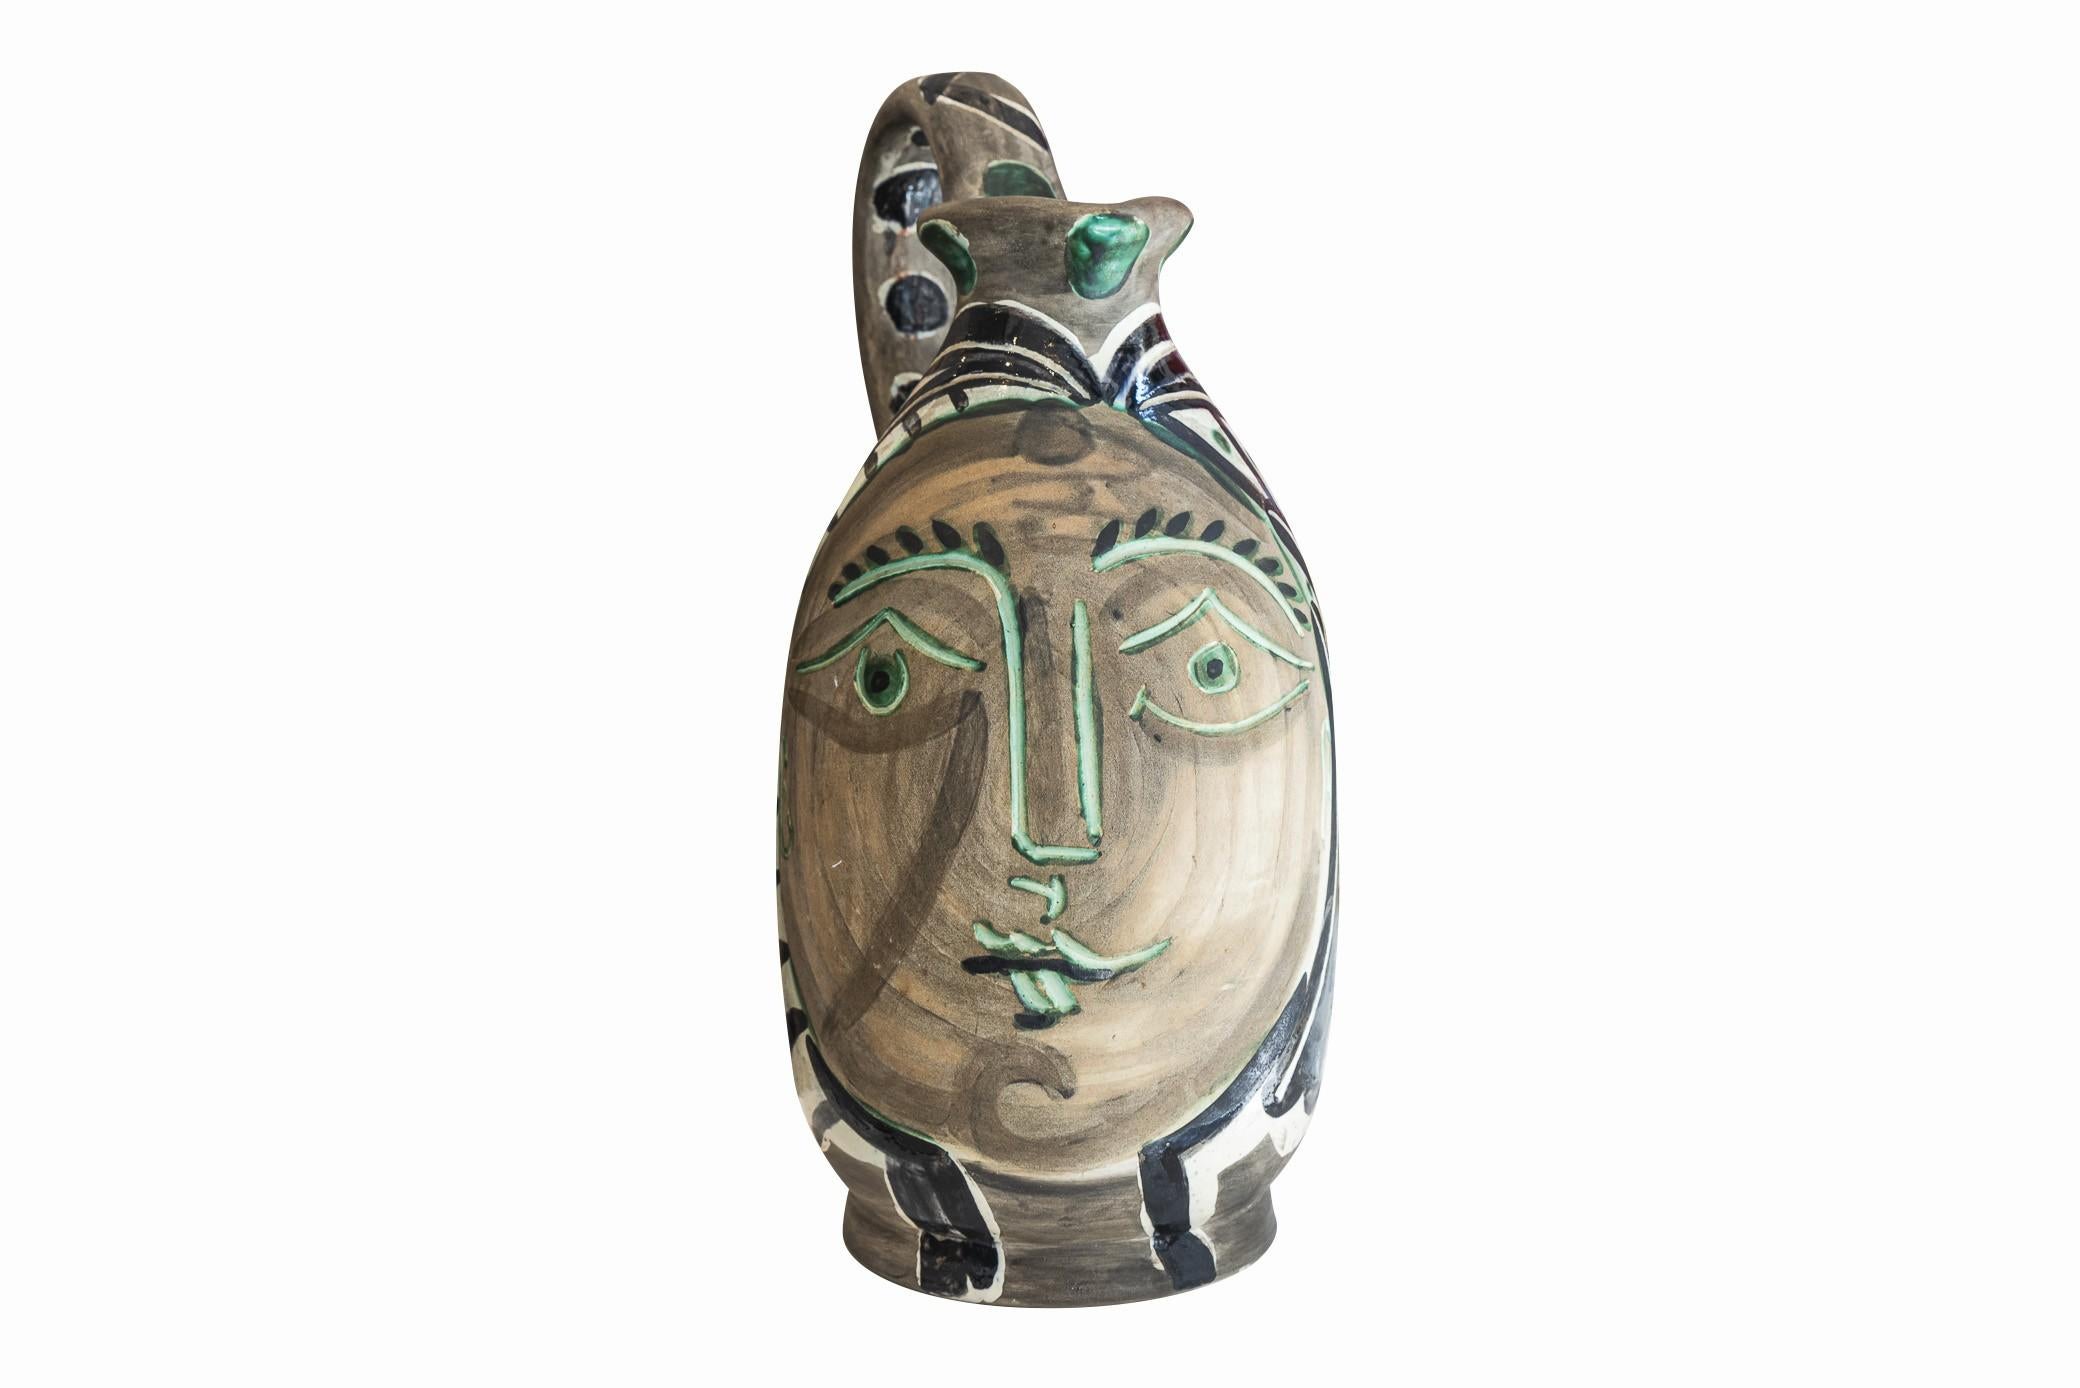 Pablo Picasso Madoura, 
"Femme du barbu" ceramic picher, 
1953, 
R.A. white earthenware, 
Black, beige, green and gray patina, 
Edited to 500 copies, 
R. 720.  

Measures: H. 37.5 cm, W. 20.5 cm.